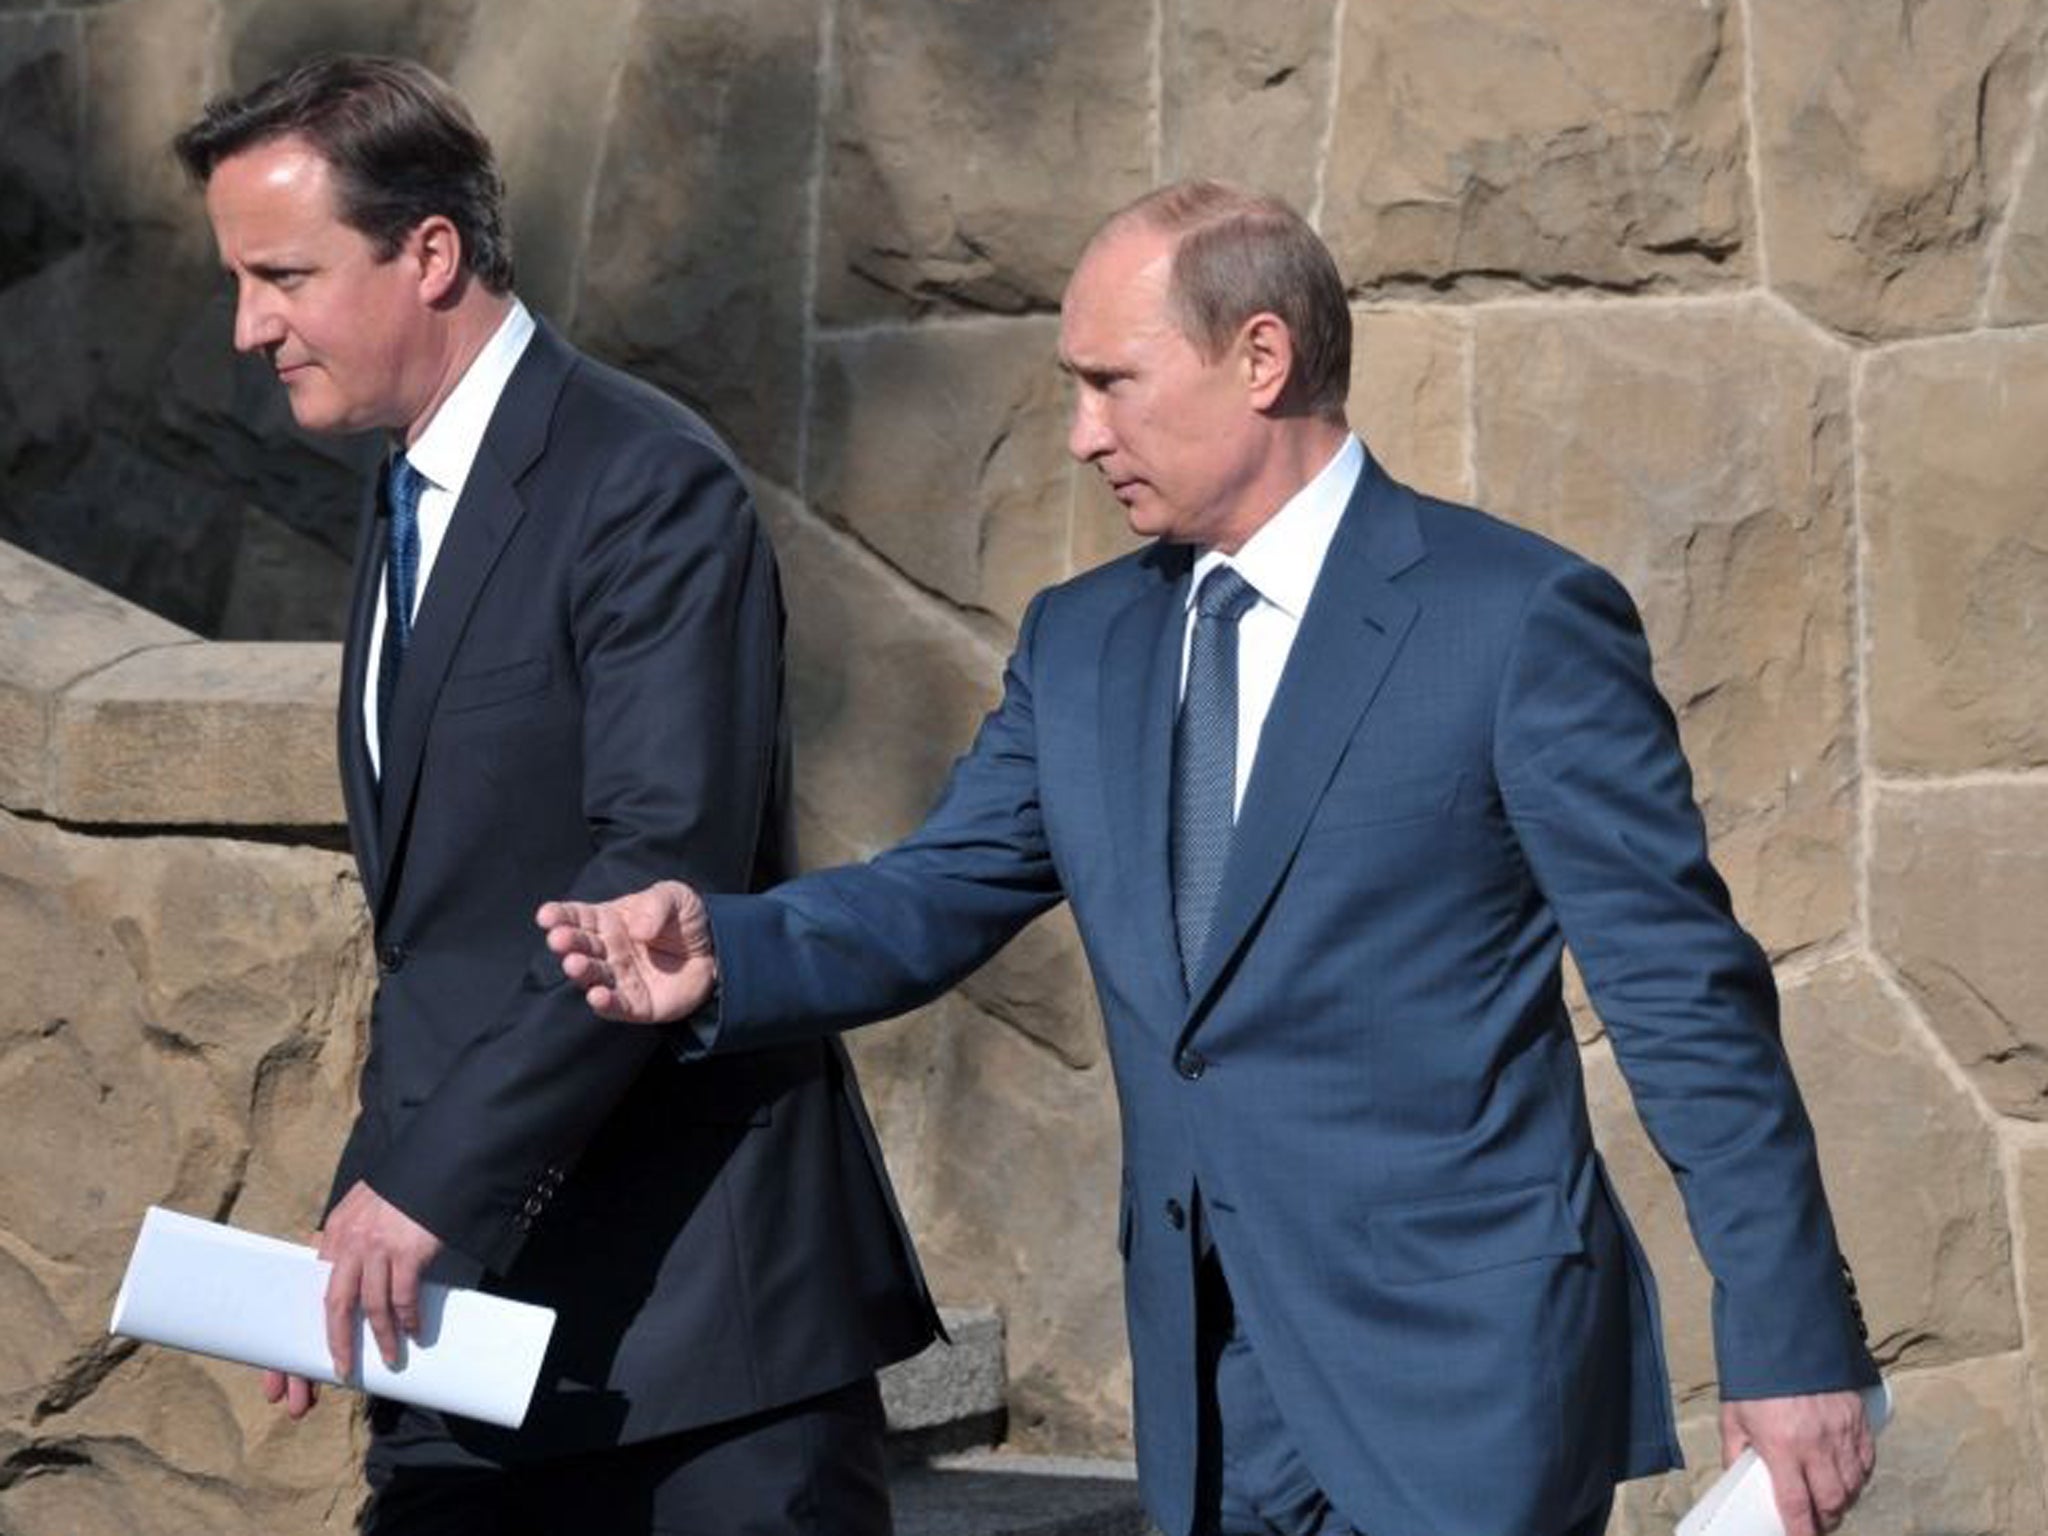 Russian President Vladimir Putin (right) and Britain's Prime Minister David Cameron arrive to address the media after their meeting in Sochi